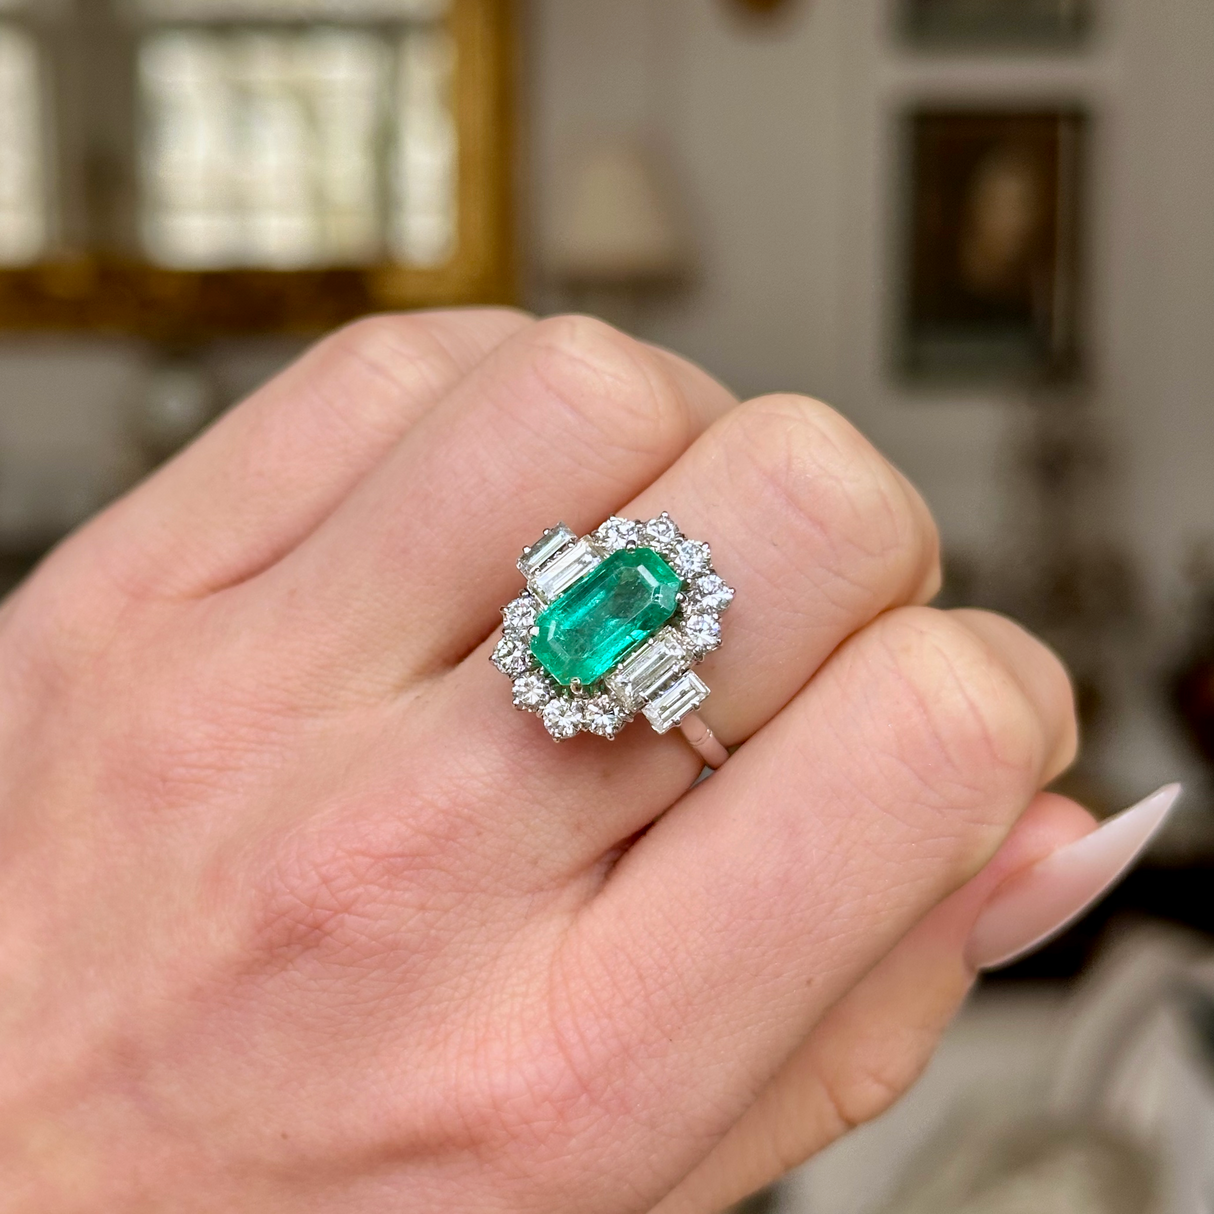 Vintage emerald and diamond cluster ring, worn on closed hand. 